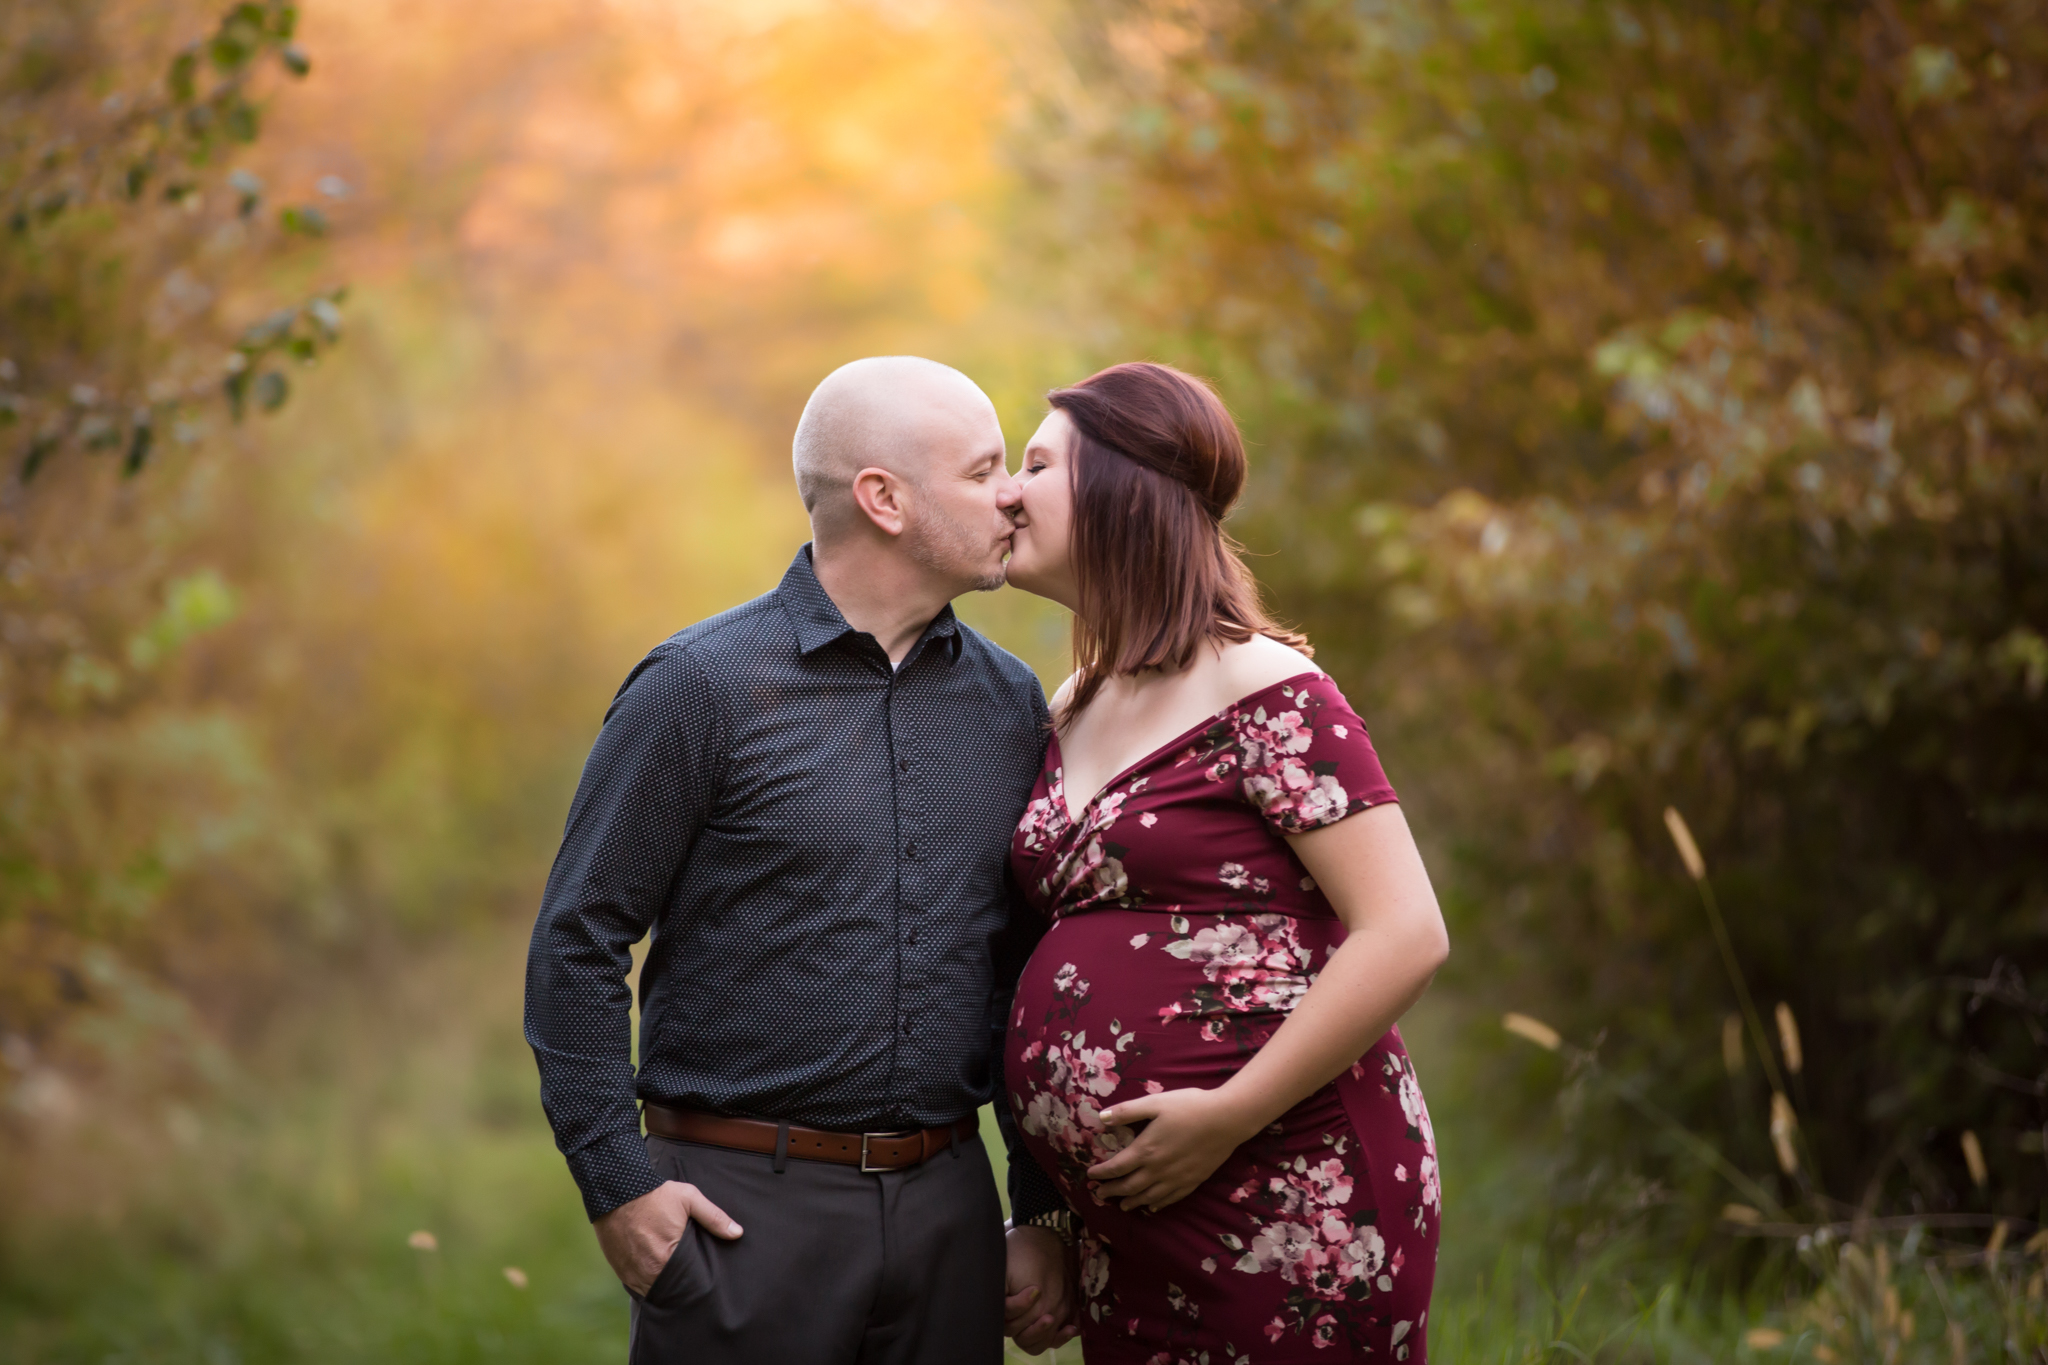 Family Fall Sessions wiht colorful leaves maternity, pet poses  - Cara Peterson Photography Rockford IL-6-2.jpg